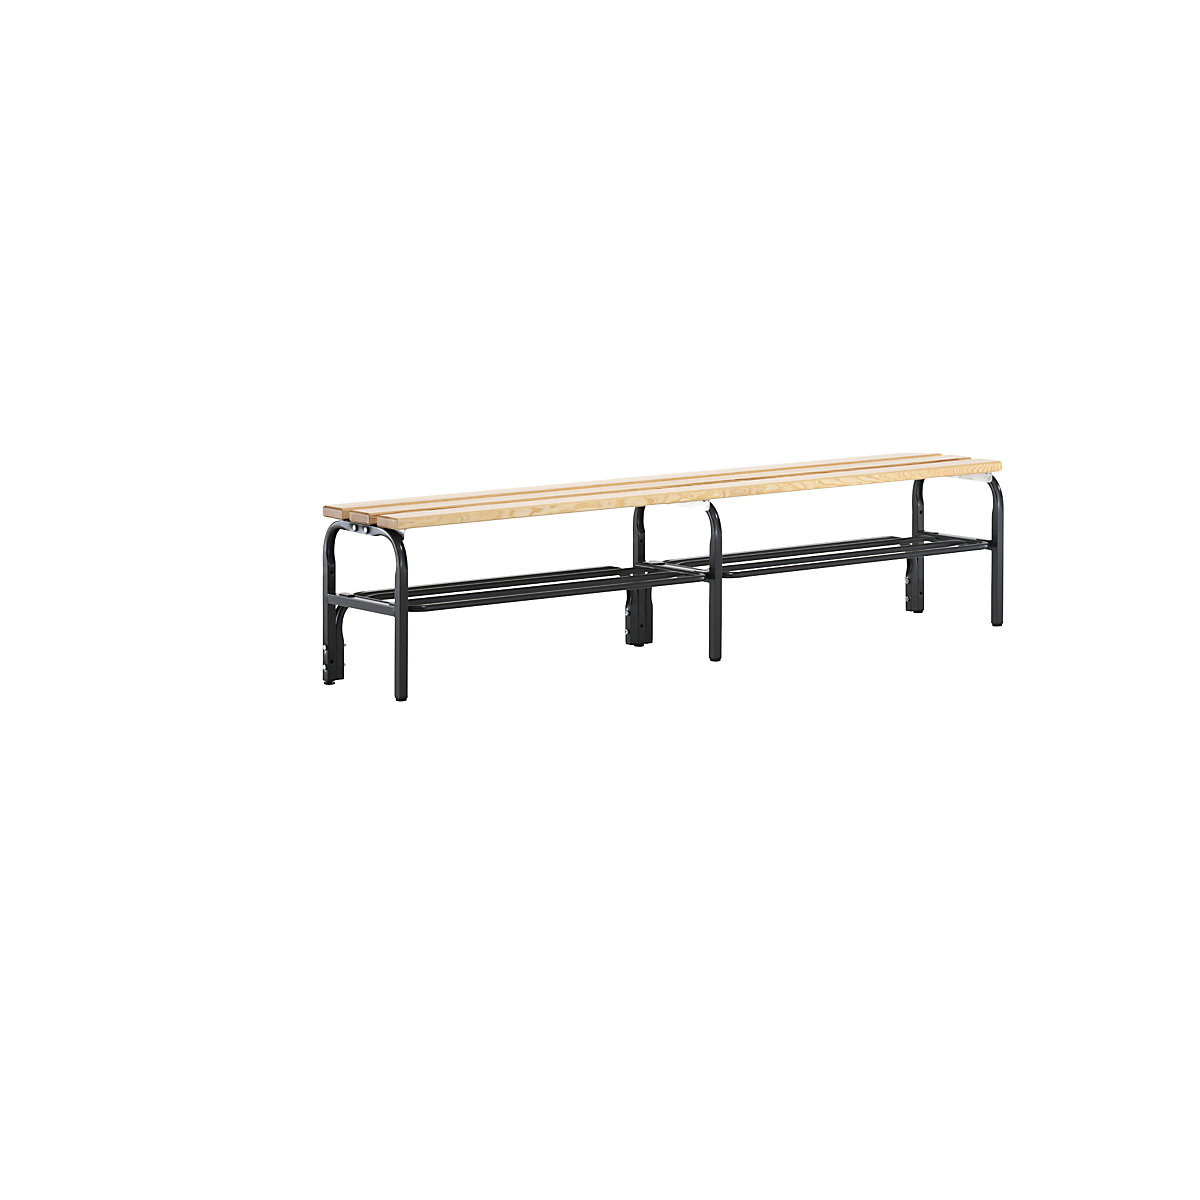 Sypro – Cloakroom bench, single sided, with shoe rack, length 1500 mm, charcoal